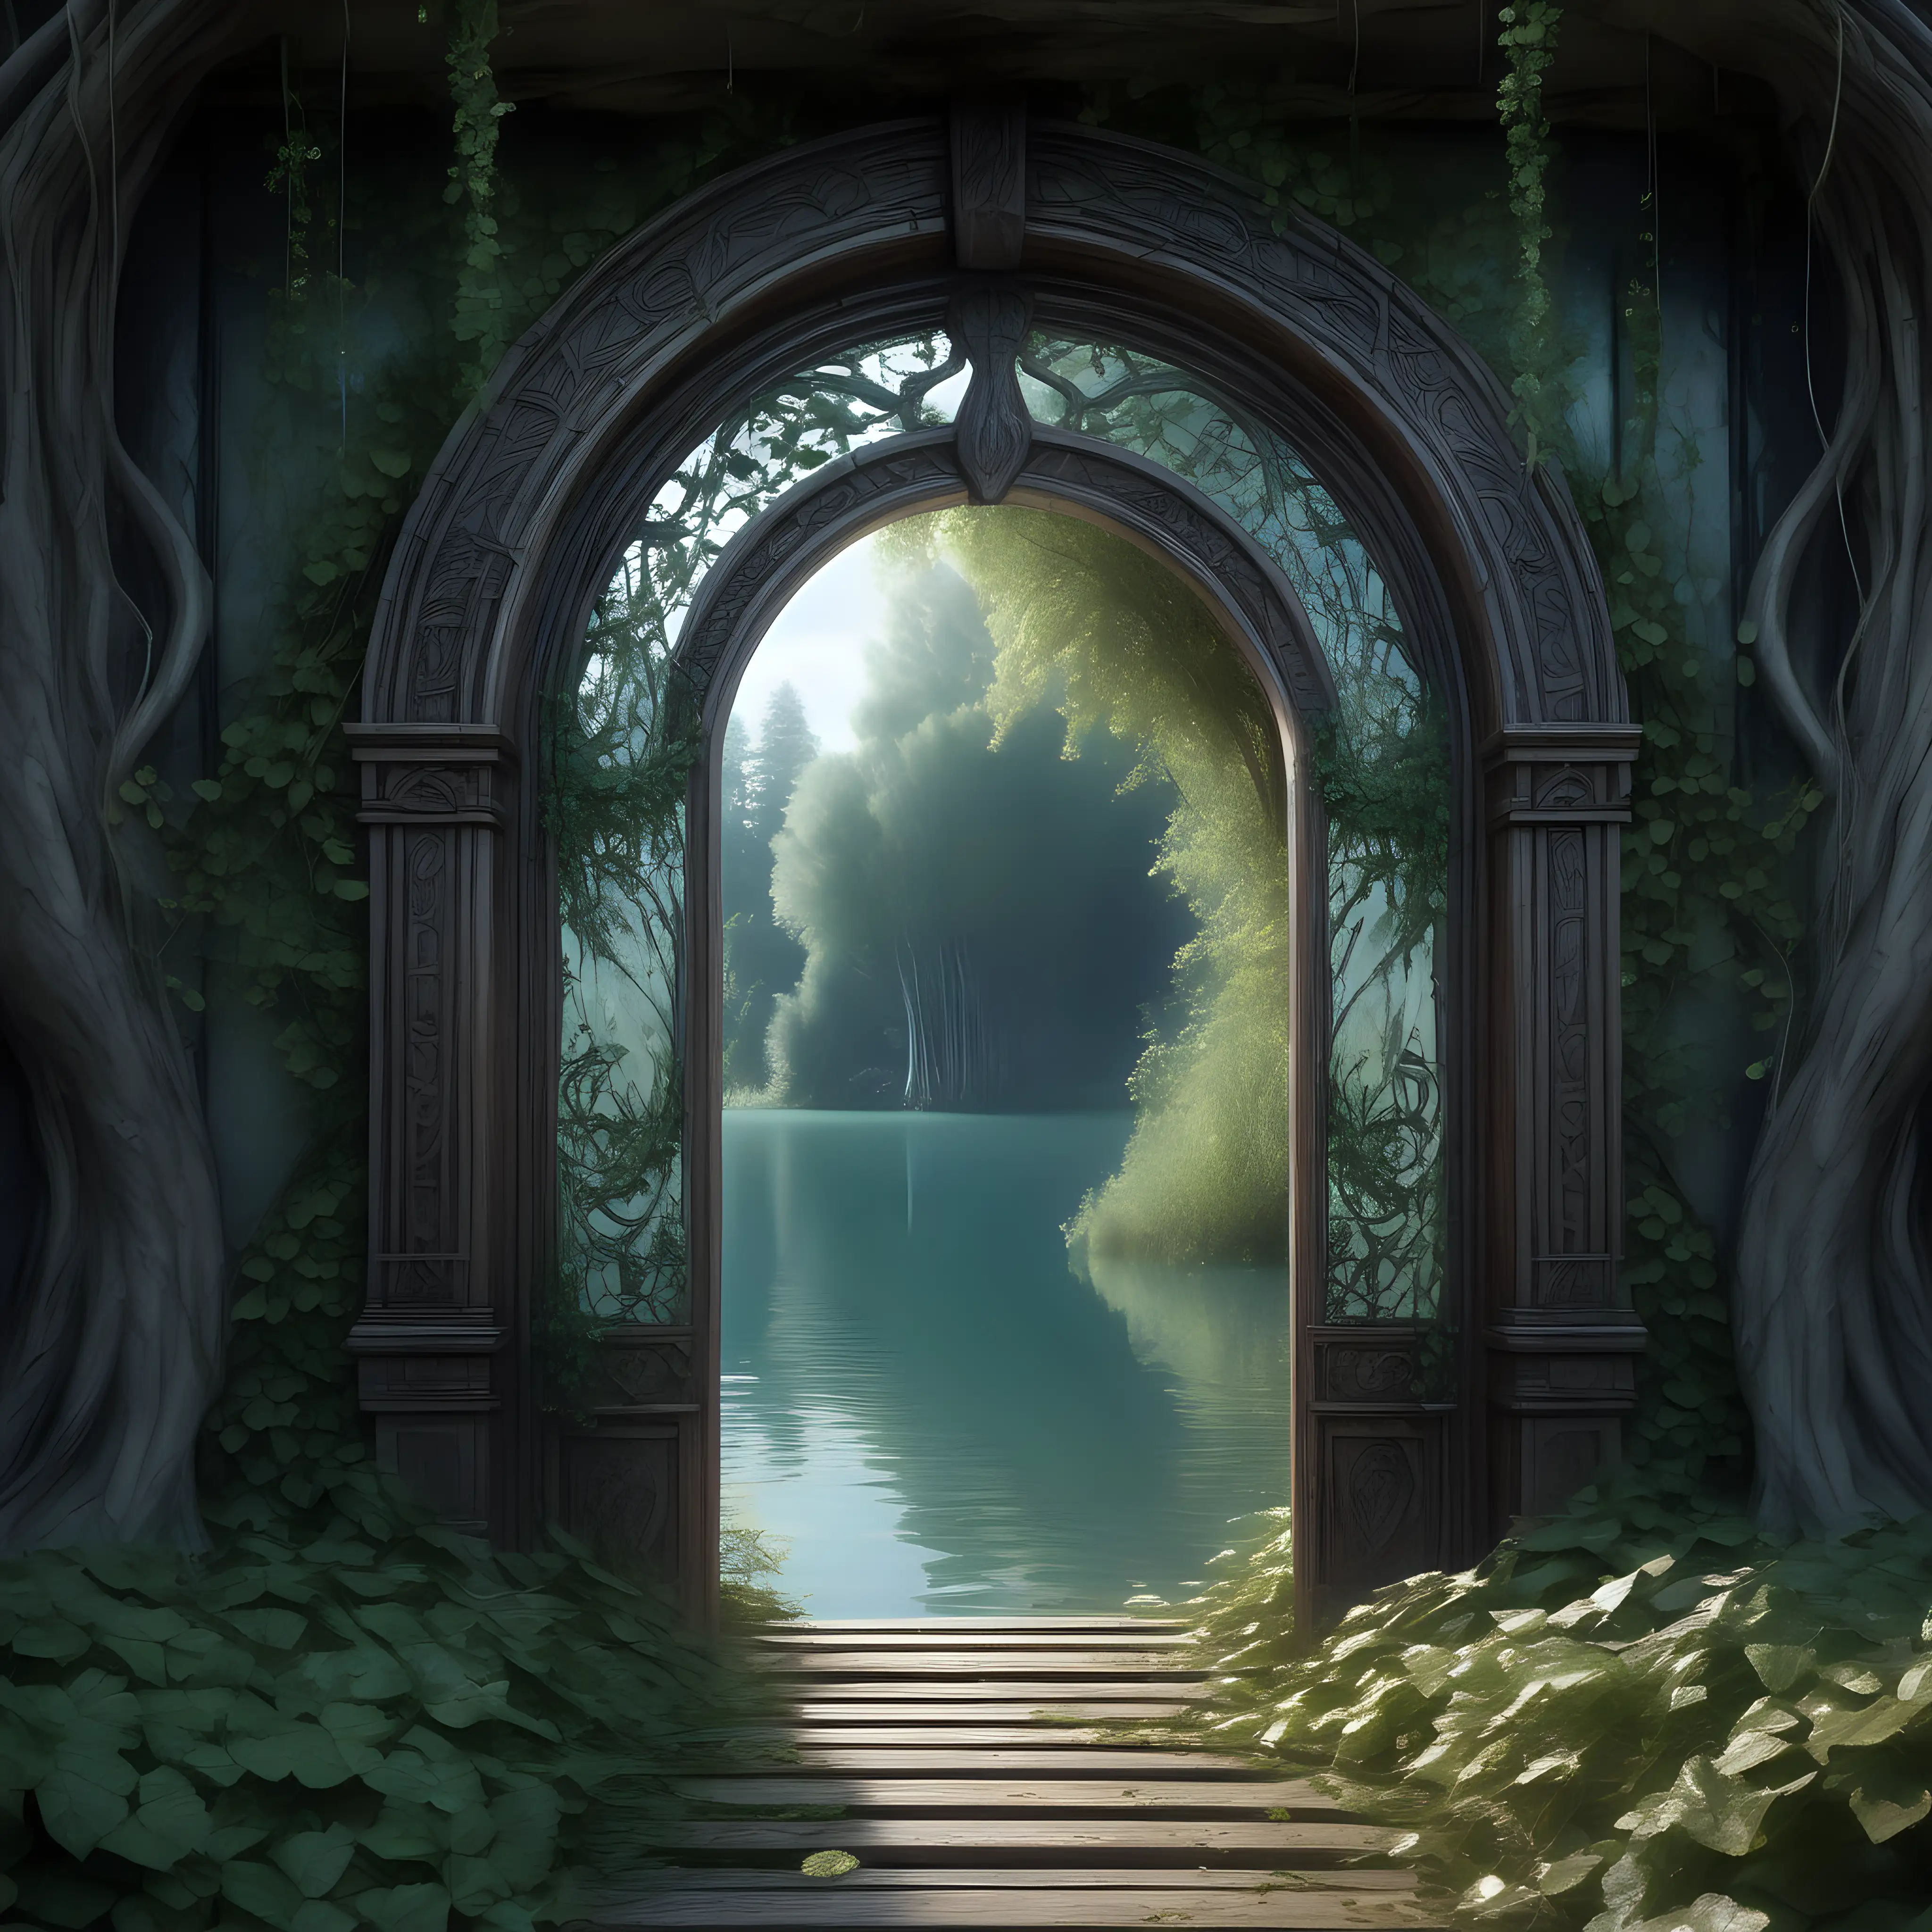 Enchanting Crystal Lake Pathway with Ancient Arched Doors and Mystical Mirror